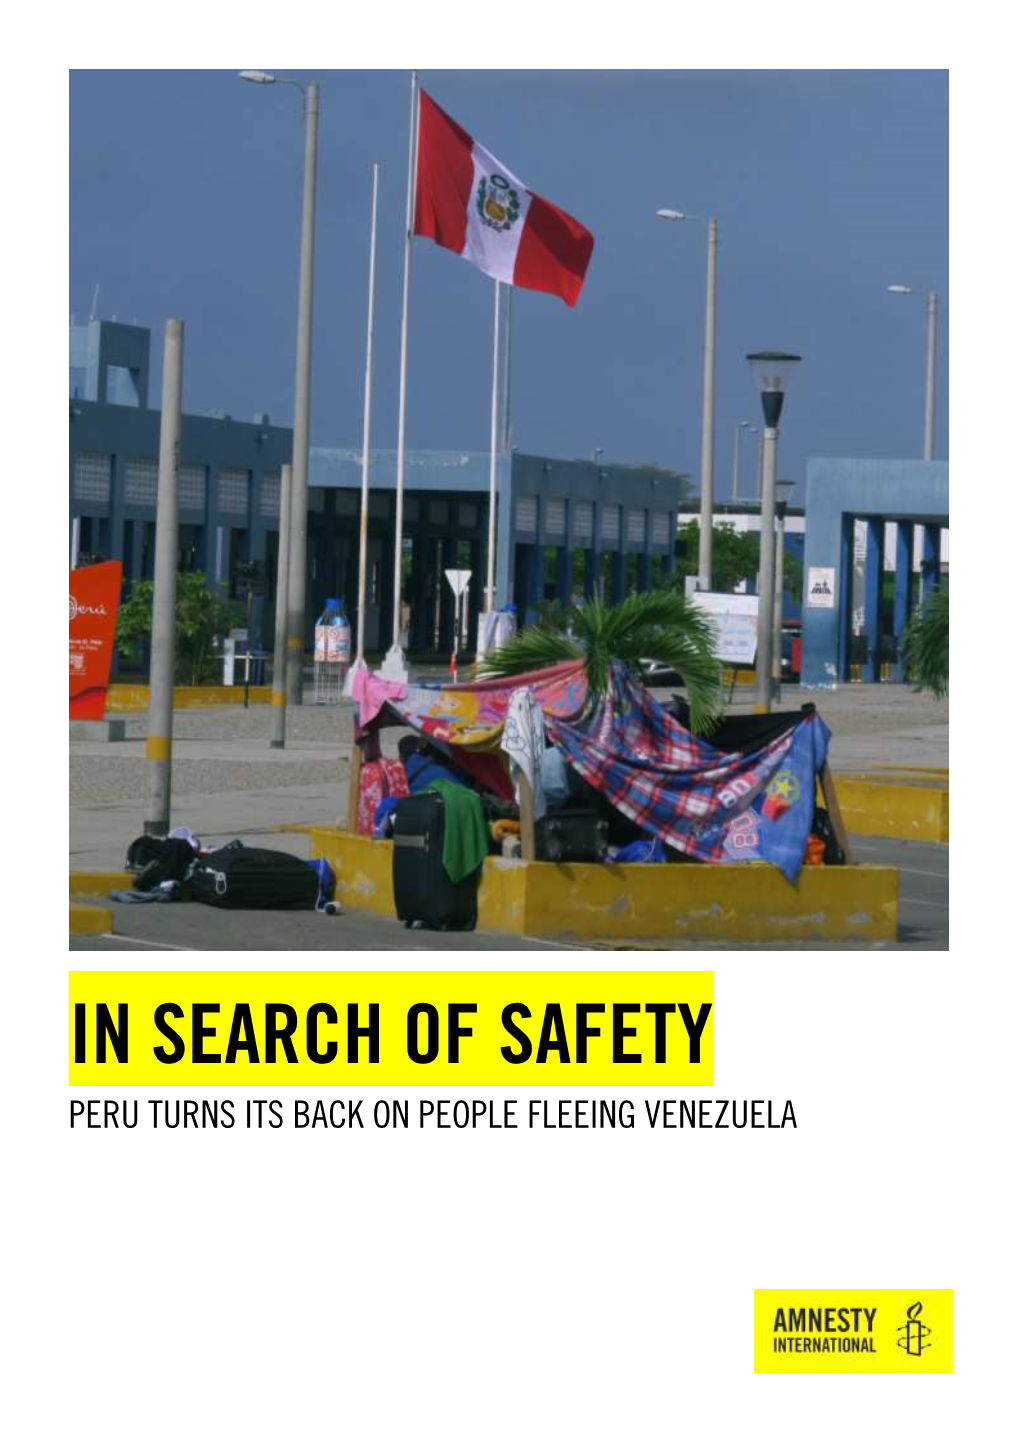 In Search of Safety Peru Turns Its Back on People Fleeing Venezuela